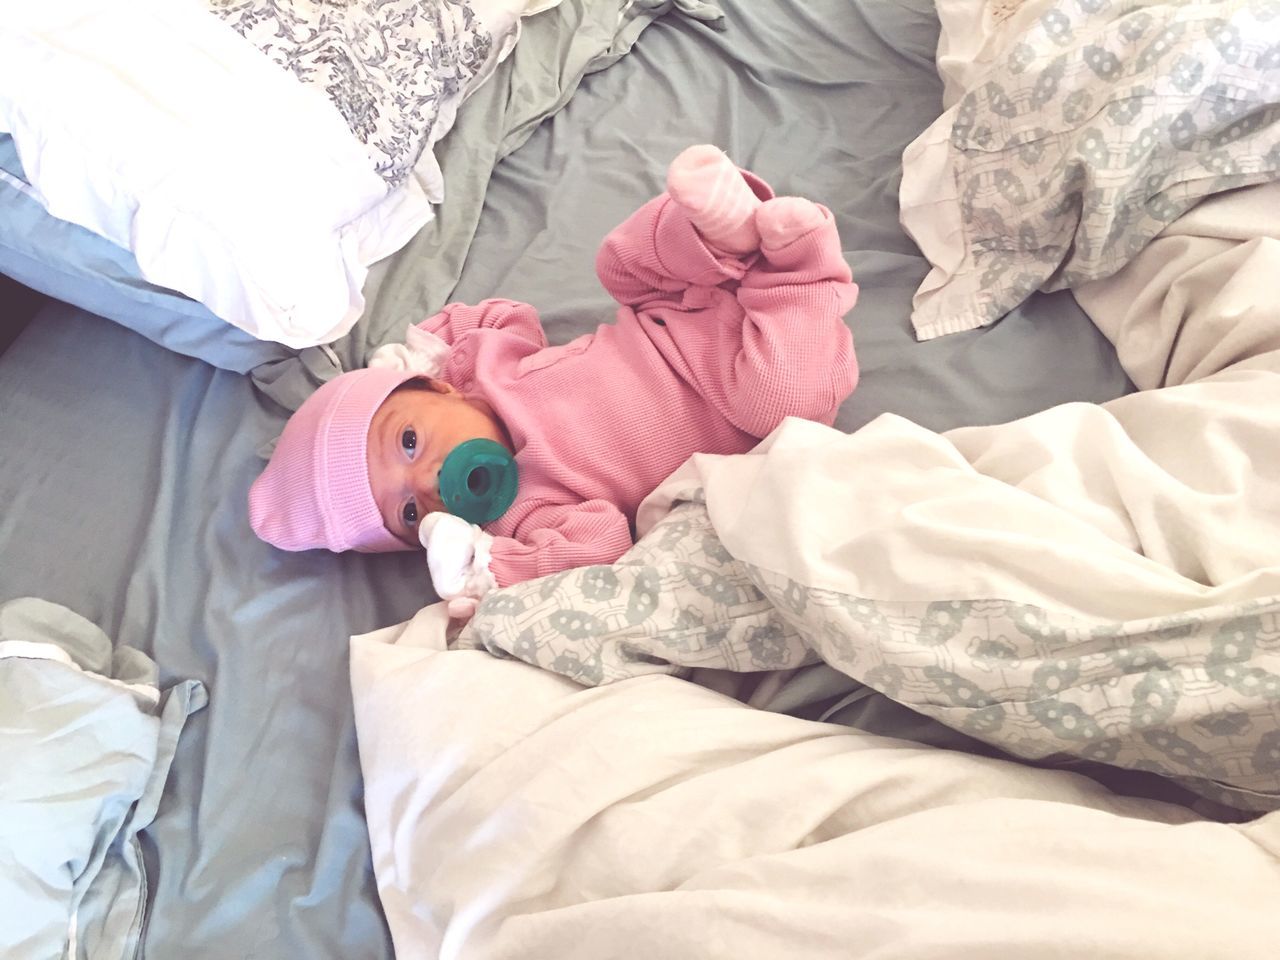 bed, baby, babyhood, real people, high angle view, bedroom, sheet, one person, childhood, indoors, pillow, newborn, low section, day, hospital, people